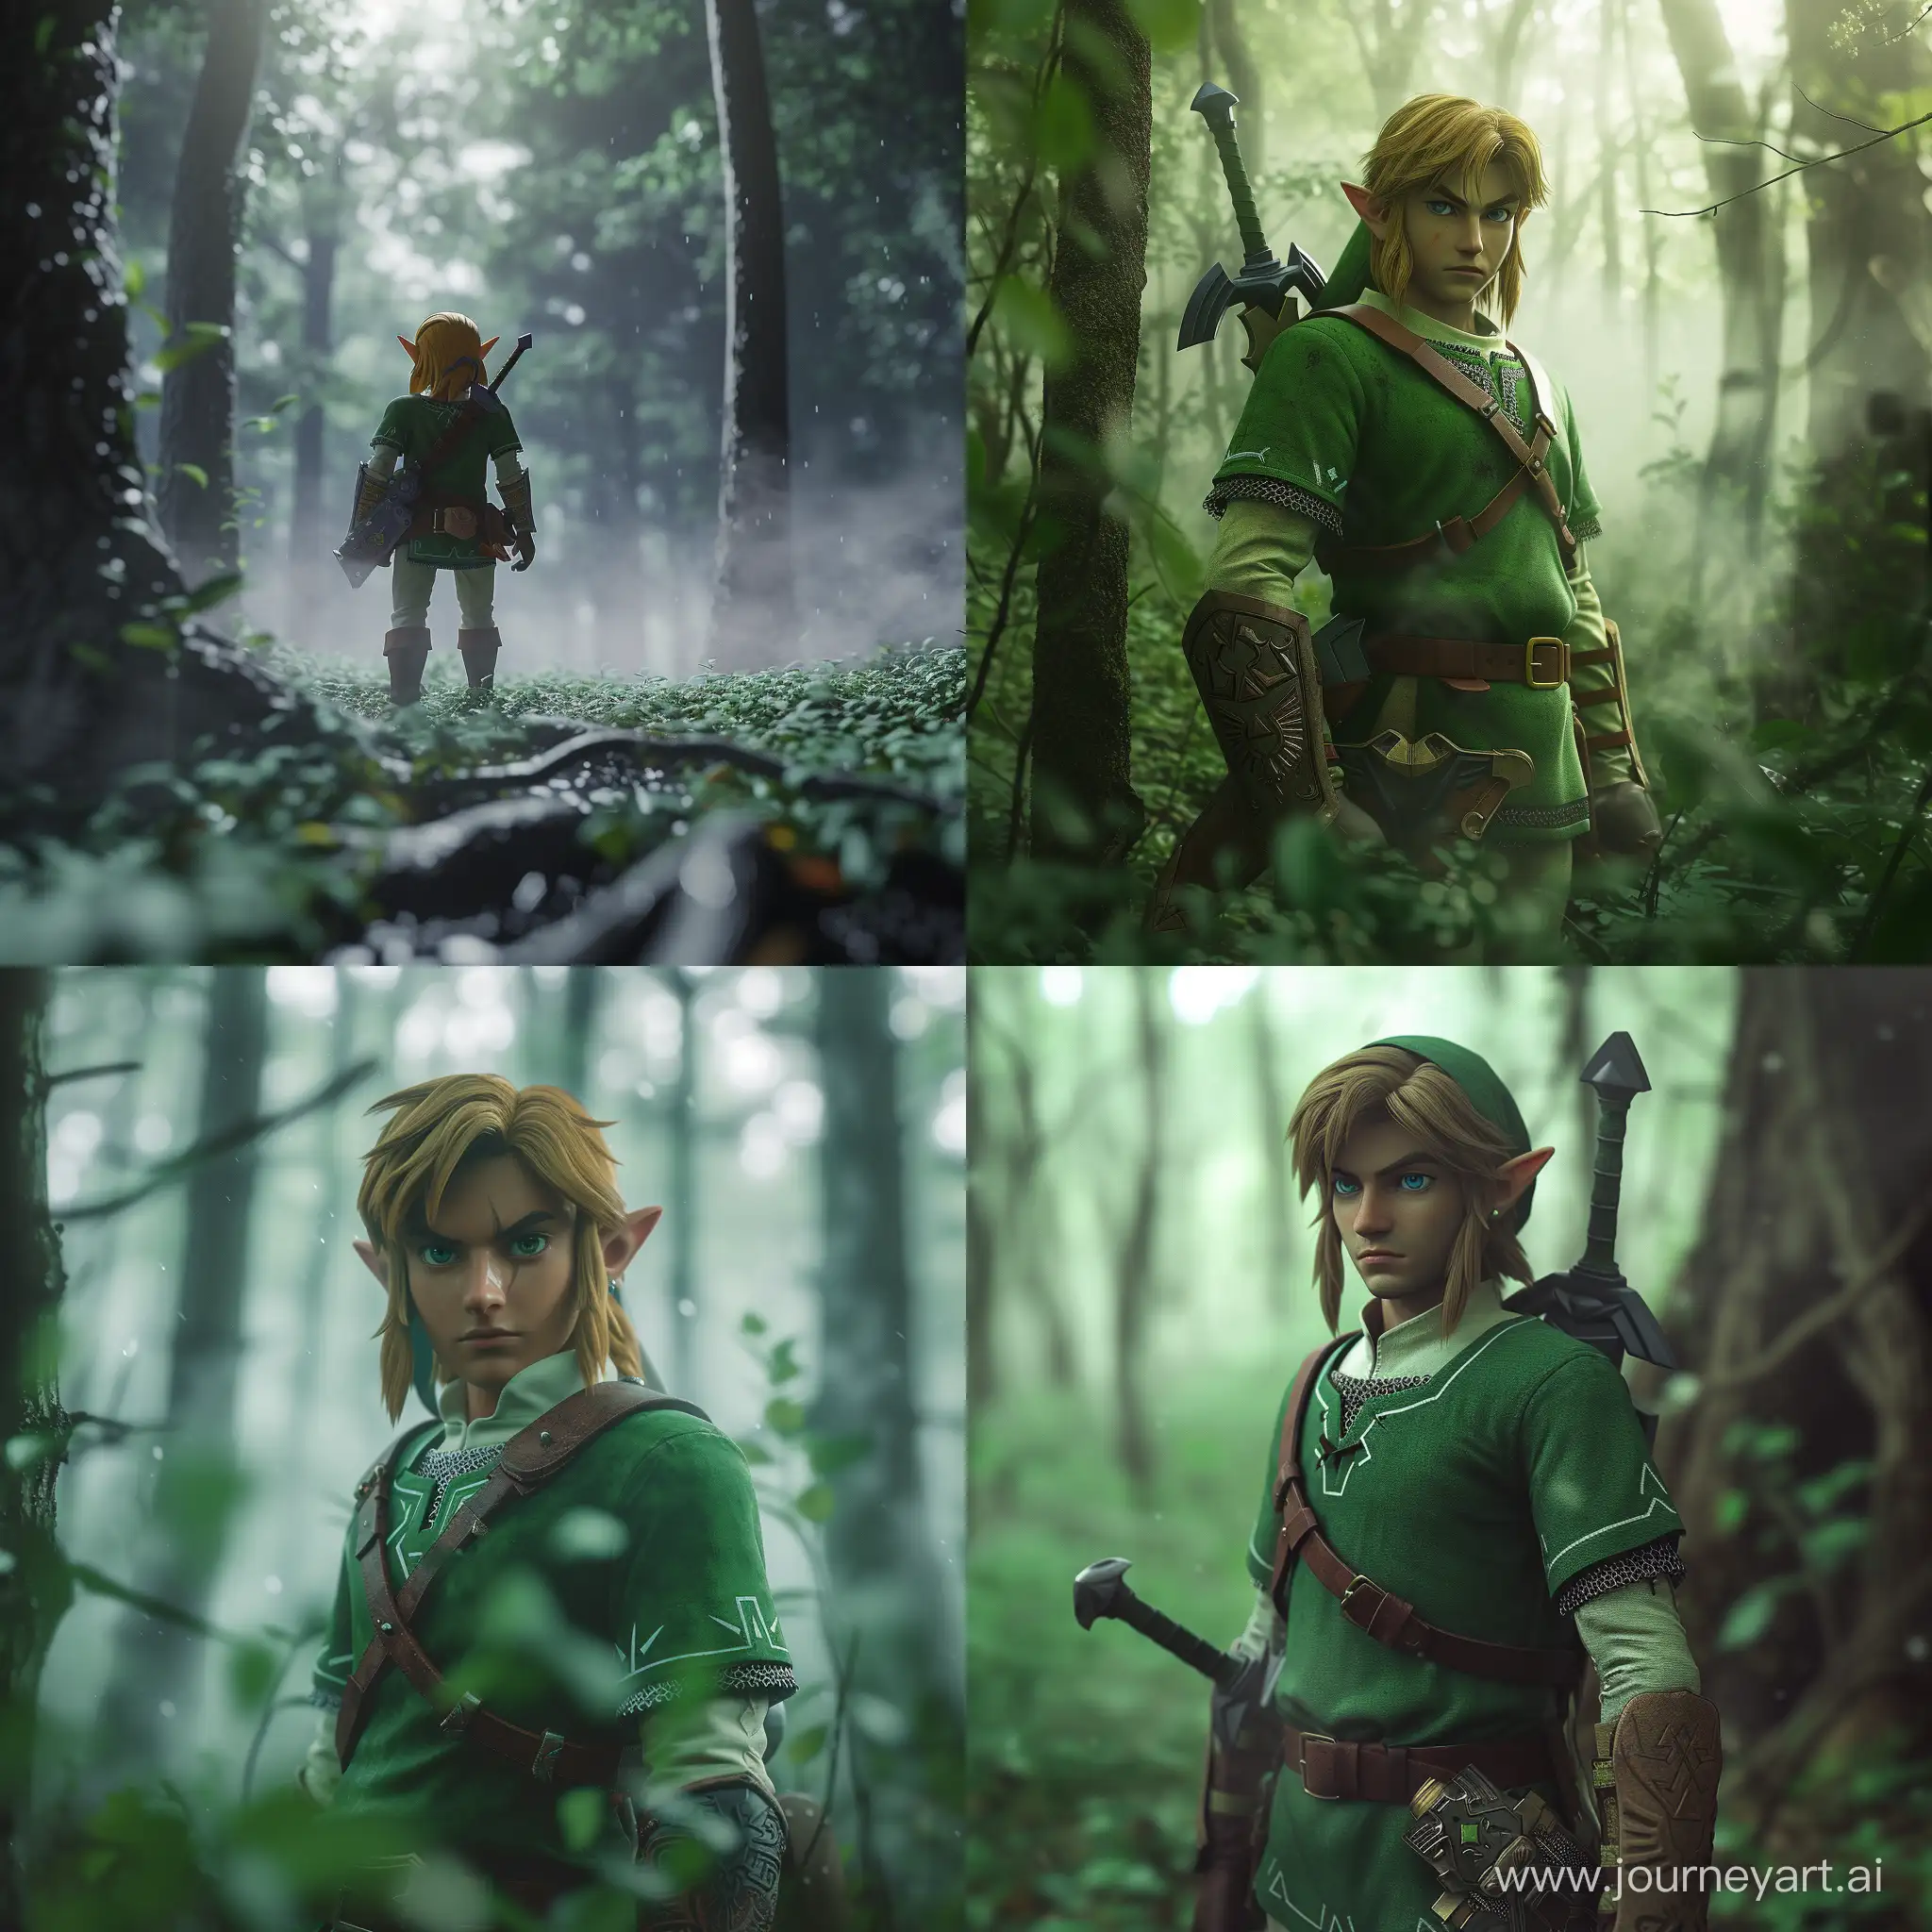 creat A realistic character link from zelda in the forest with fog hyper realistic 